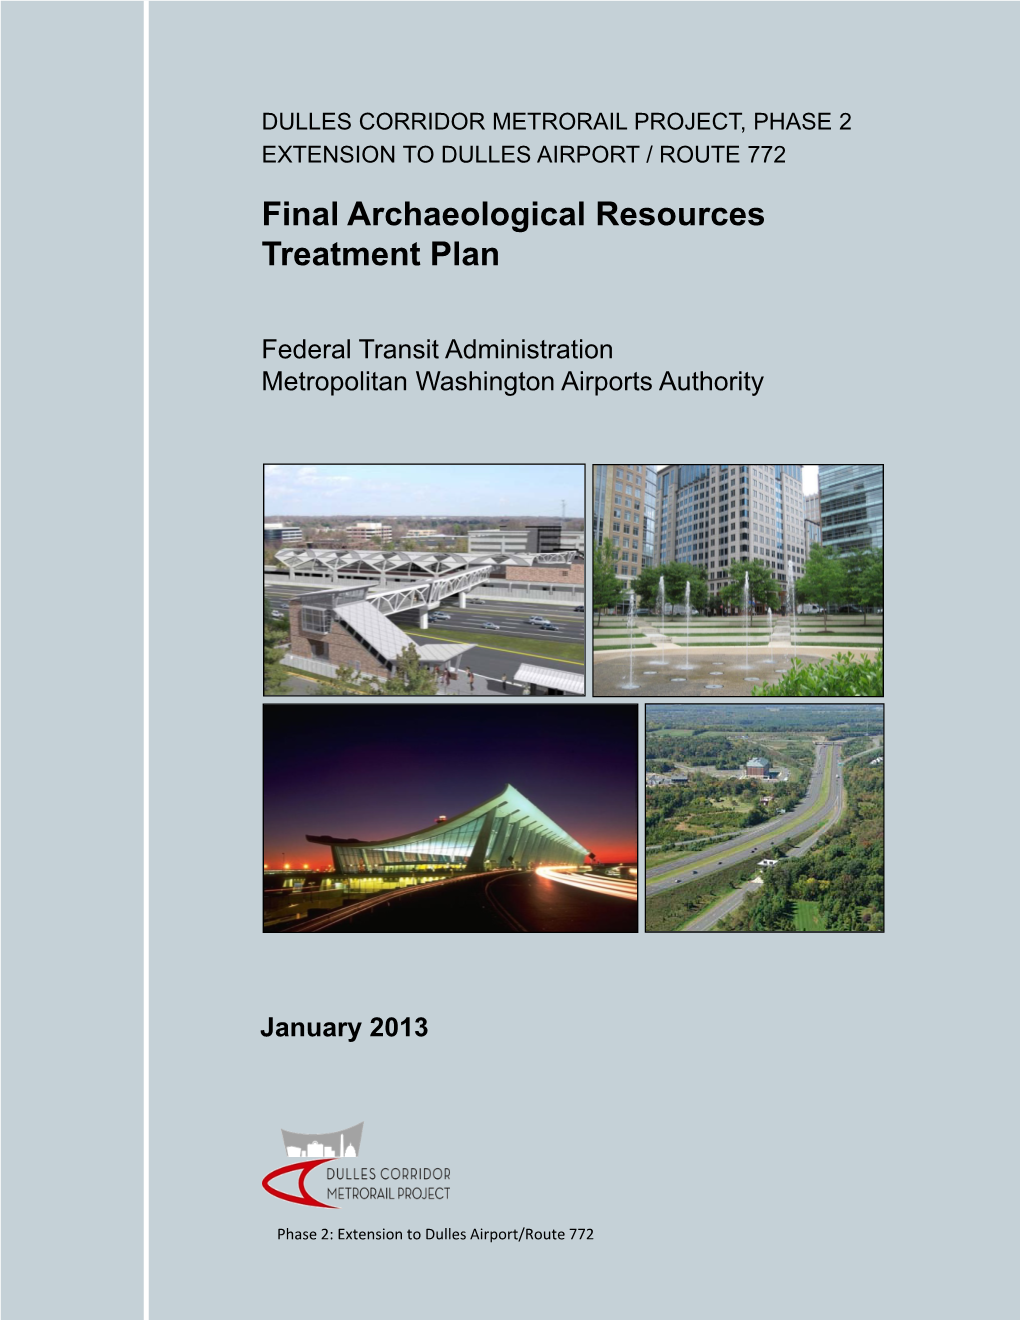 Final Archaeological Resources Treatment Plan